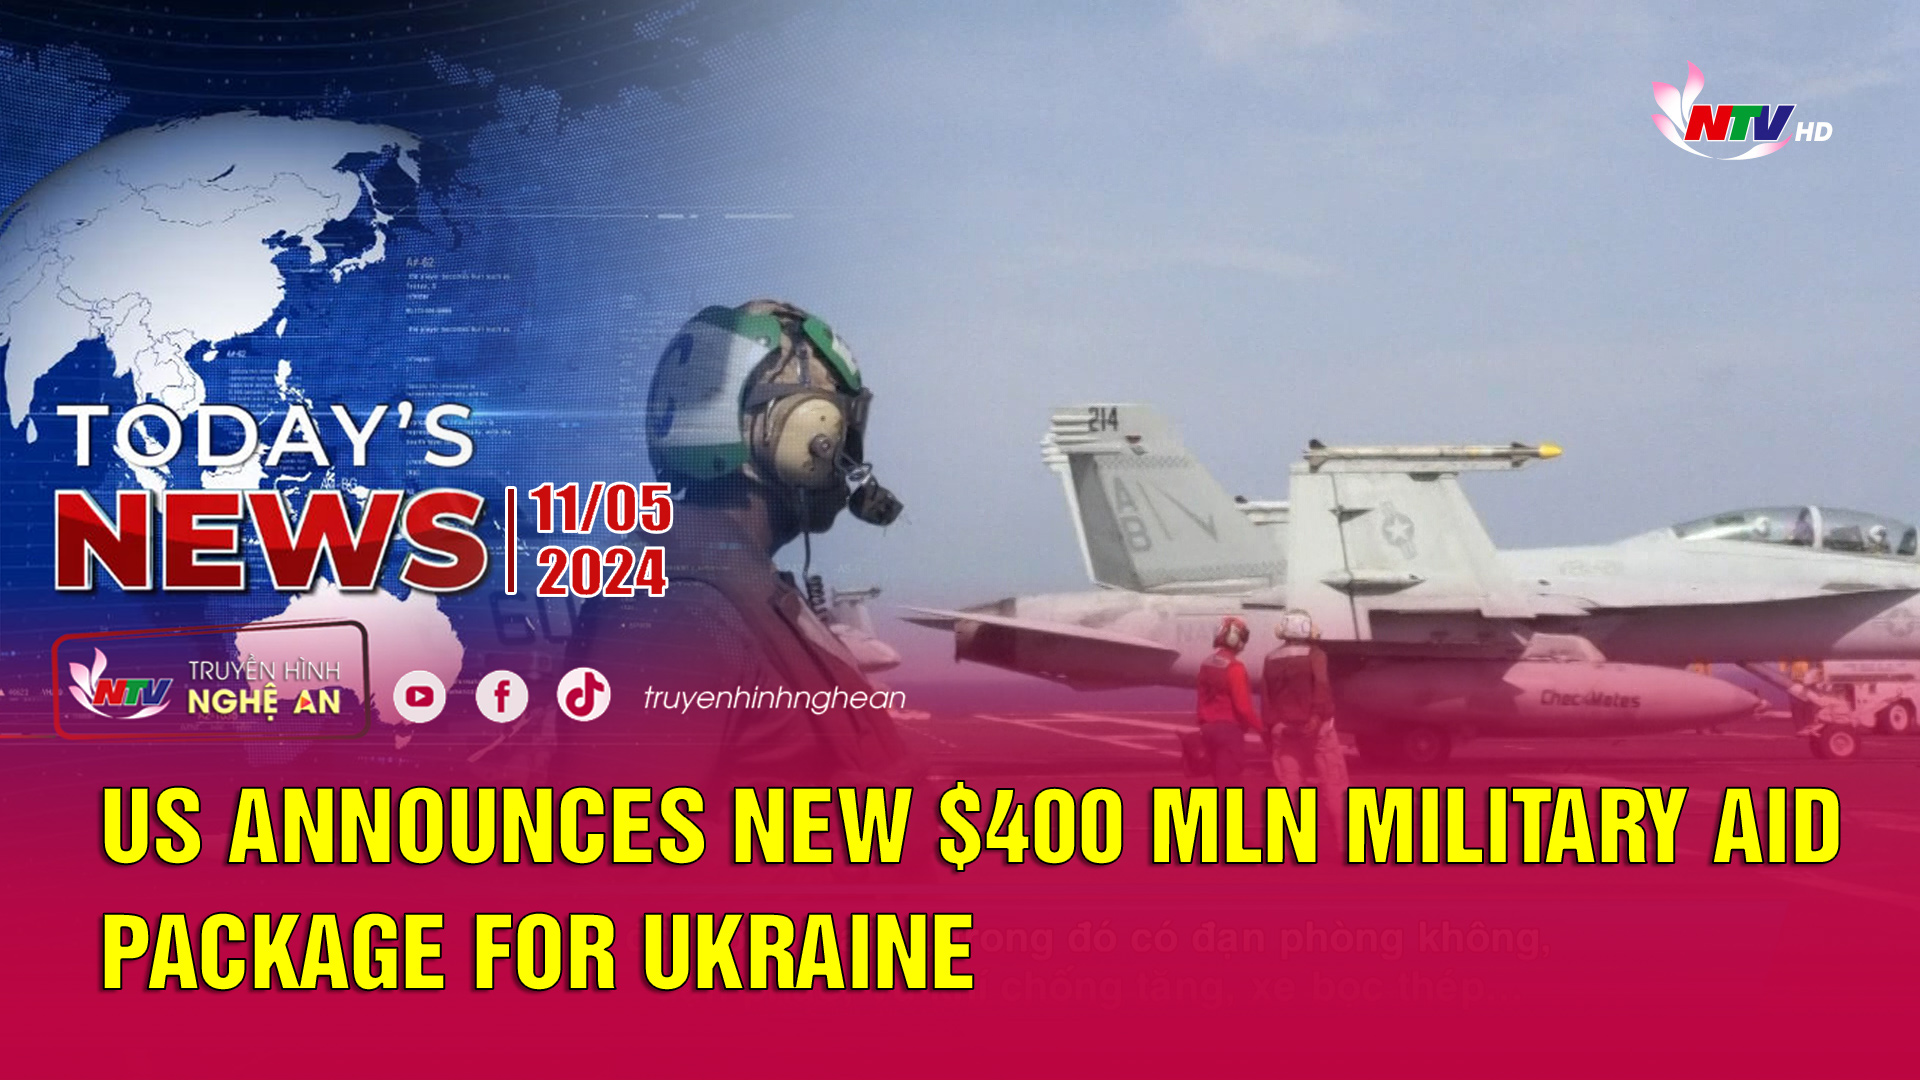 Today's News 11/05/2024: US announces new $400 mln military aid package for Ukraine